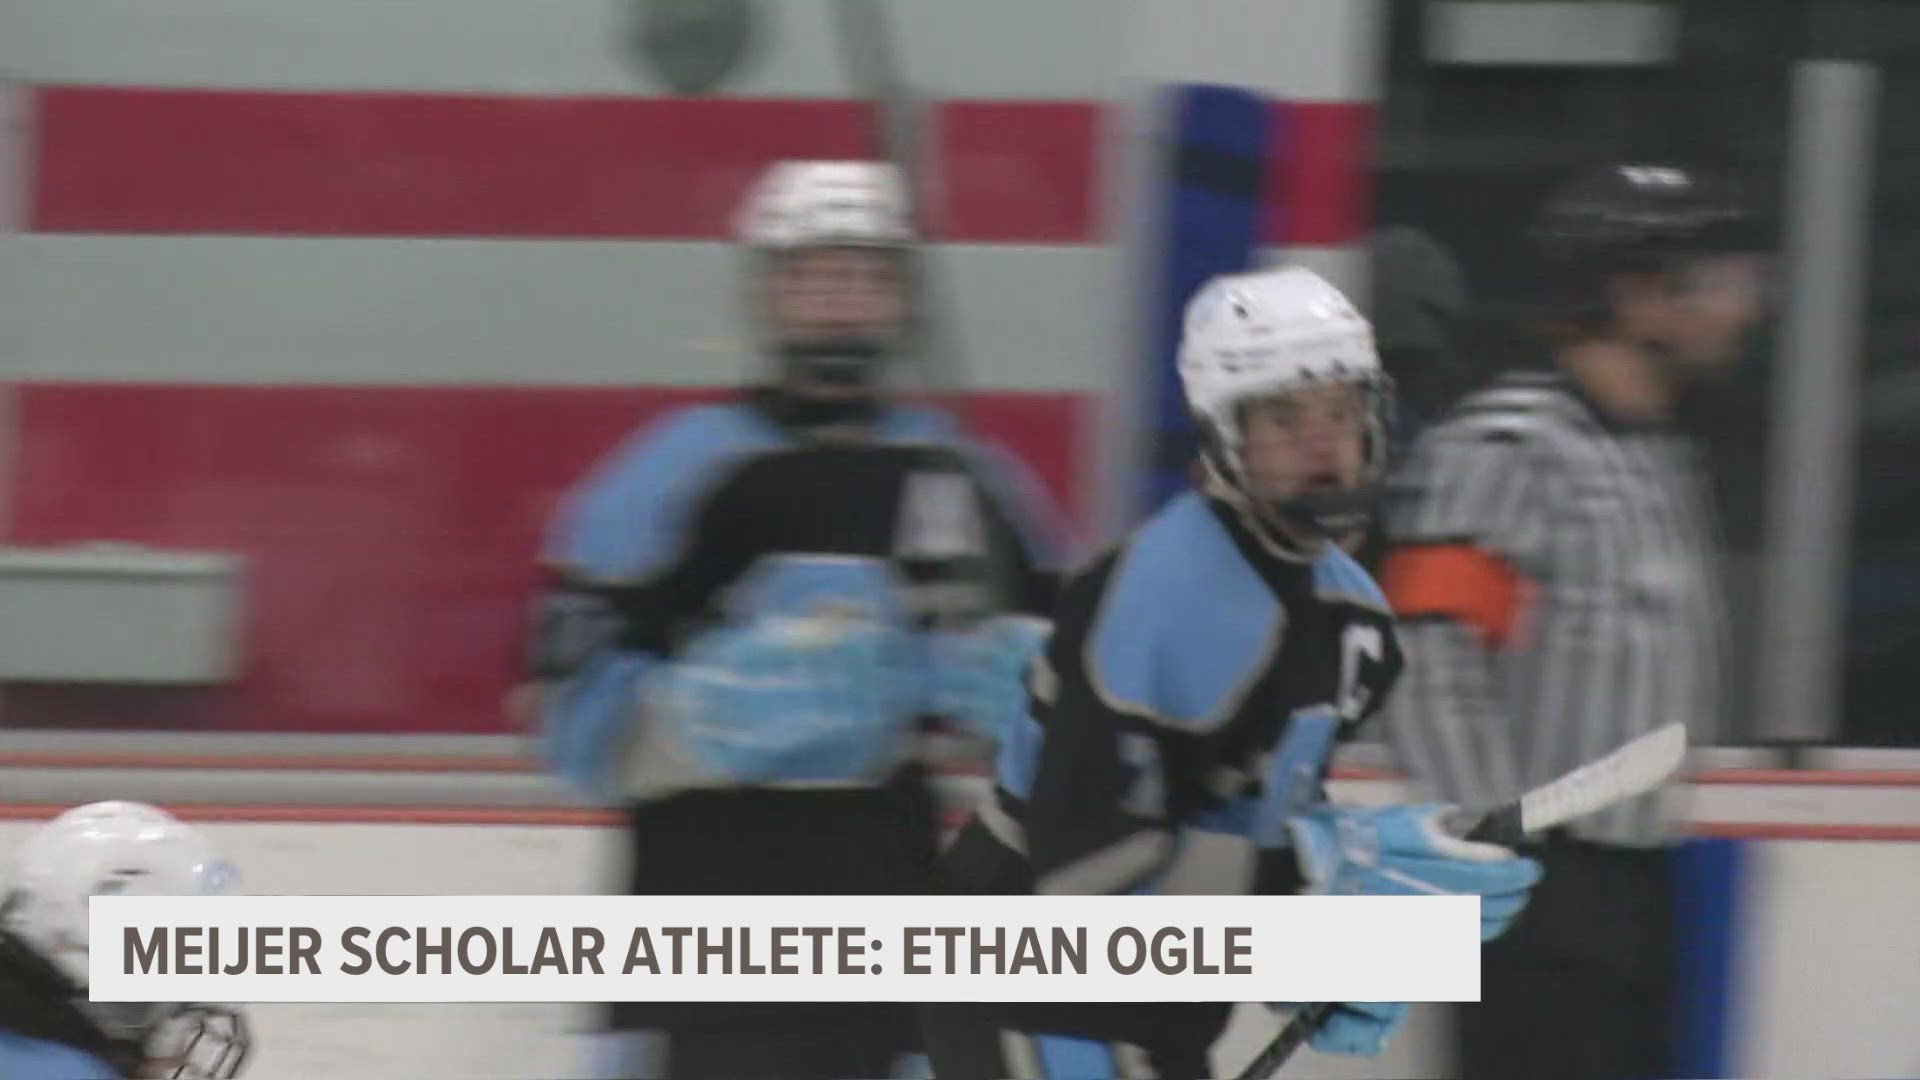 Grand Rapids Christian High School student Ethan Ogle is a great leader.